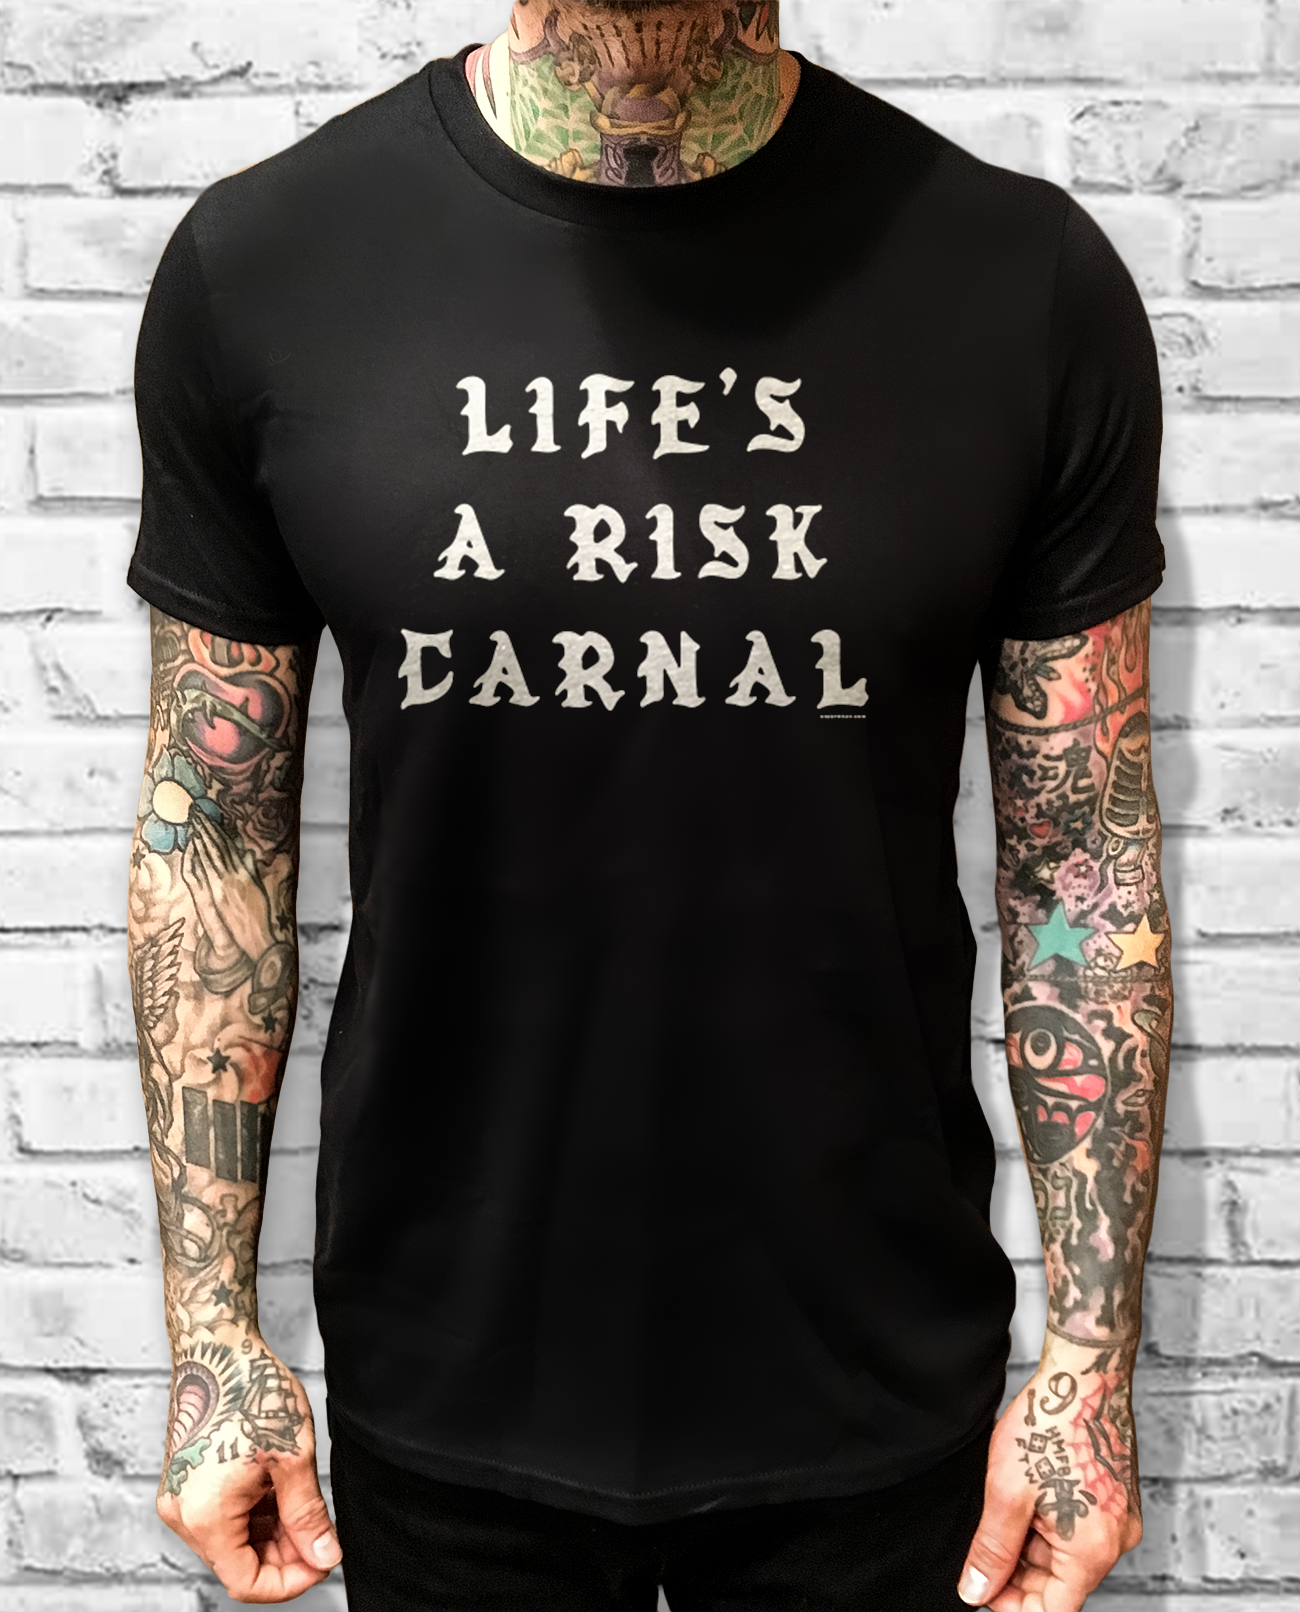 LIFE'S A RISK TEXT BLACK TEE - cristocatofficial